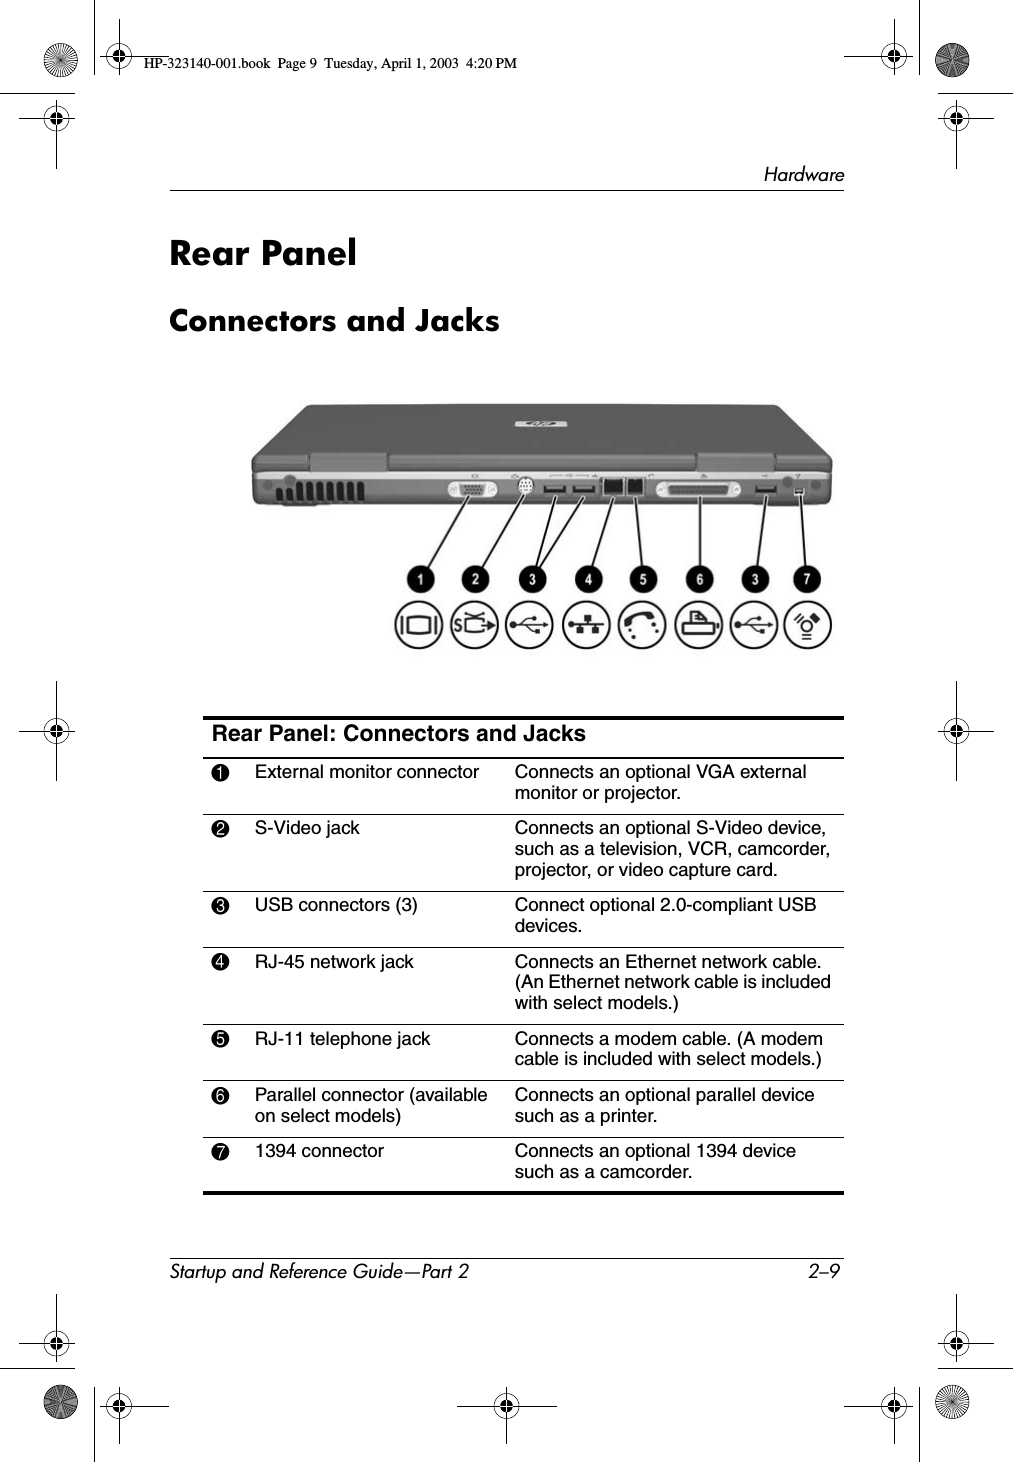 HardwareStartup and Reference Guide—Part 2 2–9Rear PanelConnectors and JacksRear Panel: Connectors and Jacks1External monitor connector Connects an optional VGA external monitor or projector.2S-Video jack Connects an optional S-Video device, such as a television, VCR, camcorder, projector, or video capture card.3USB connectors (3) Connect optional 2.0-compliant USB devices.4RJ-45 network jack  Connects an Ethernet network cable. (An Ethernet network cable is included with select models.)5RJ-11 telephone jack Connects a modem cable. (A modem cable is included with select models.)6Parallel connector (available on select models)Connects an optional parallel device such as a printer.71394 connector  Connects an optional 1394 device such as a camcorder.HP-323140-001.book  Page 9  Tuesday, April 1, 2003  4:20 PM